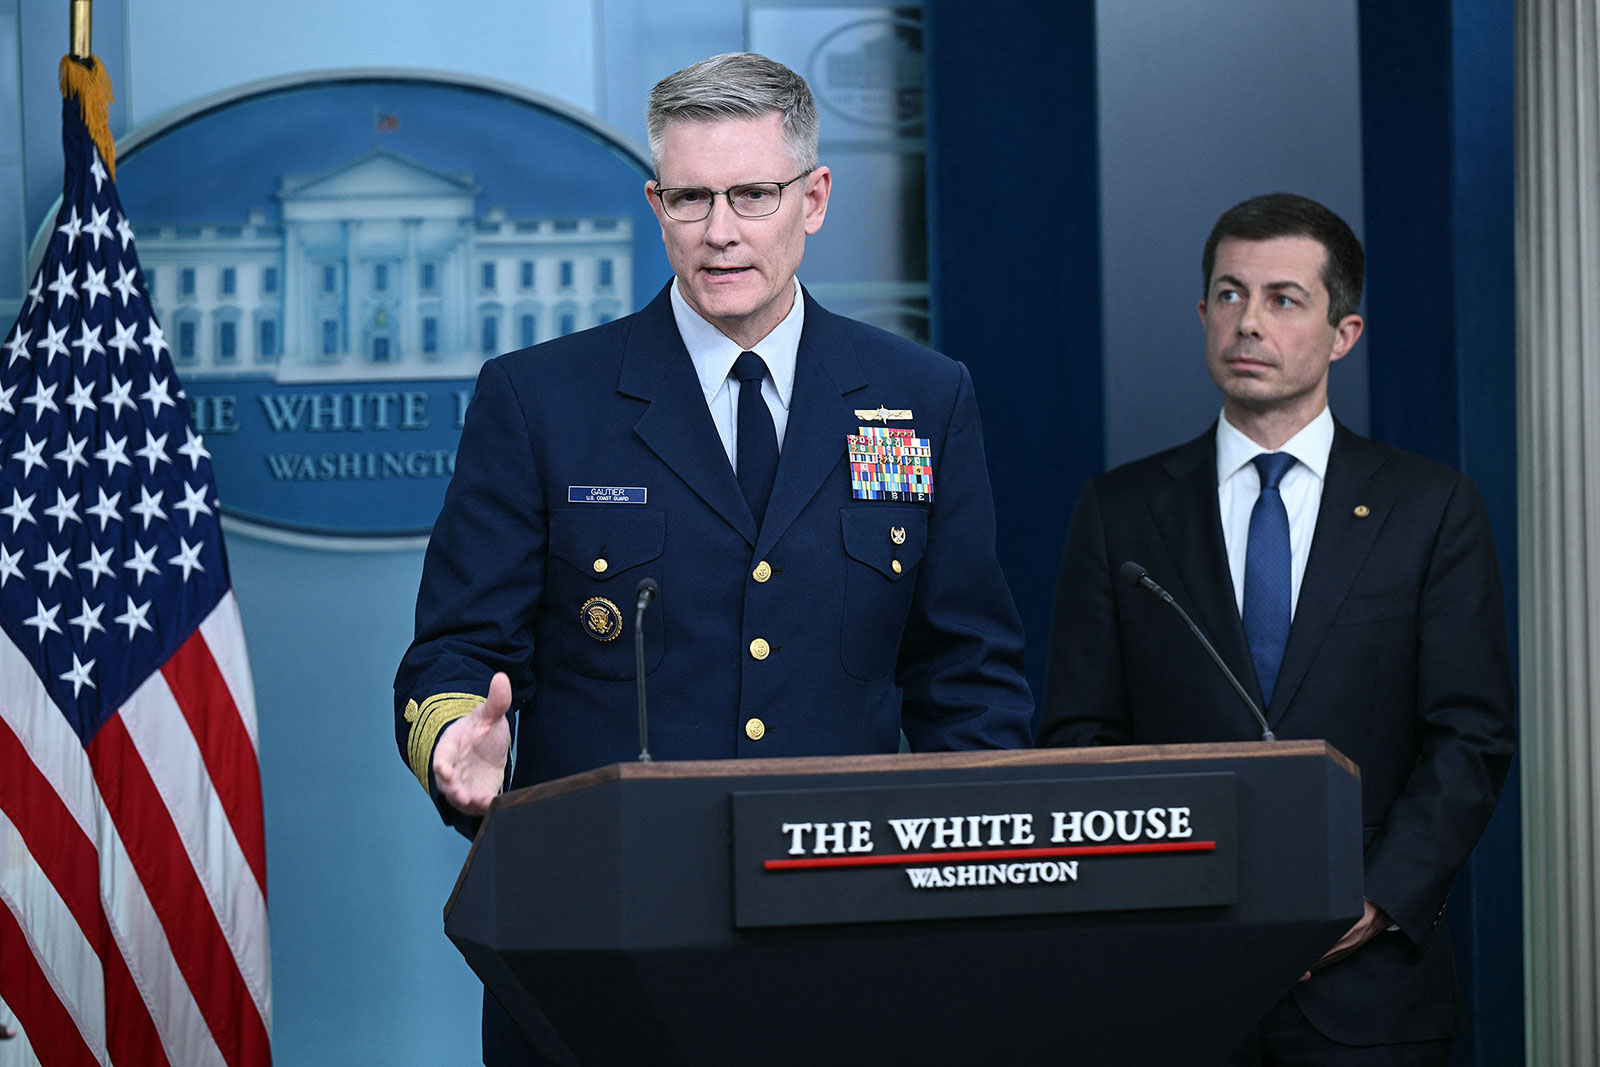 Coast Guard Vice Admiral Peter Gautier speaks during the daily briefing at White House in Washington, DC, on Wednesday.